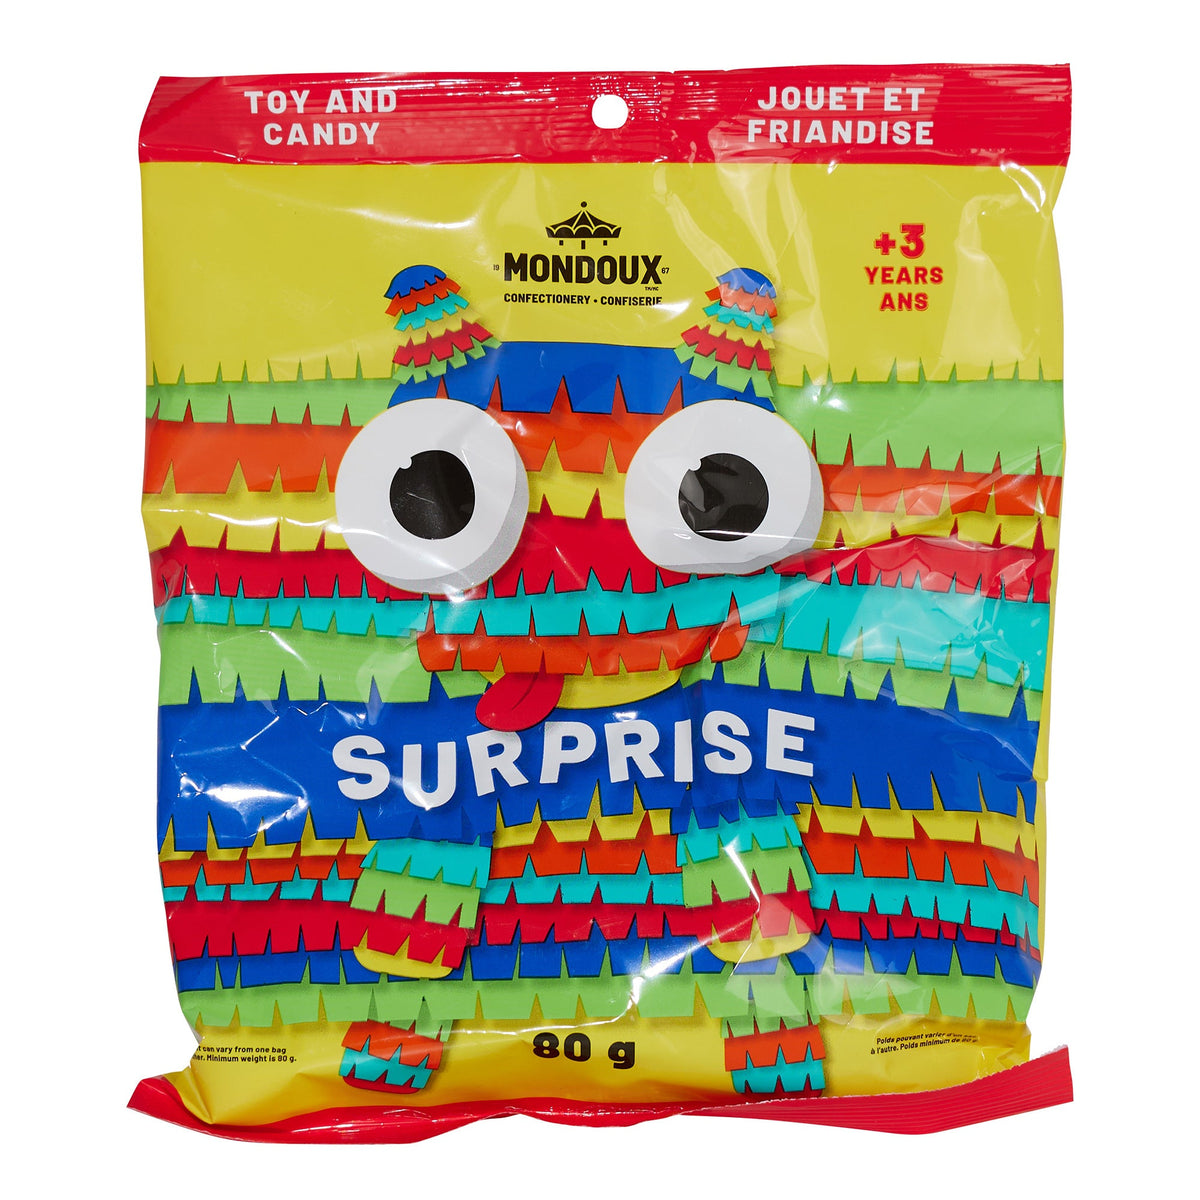 CONFISERIE MONDOUX INC. Candy Surprise Bag Toy and Candy,80g , 1 count